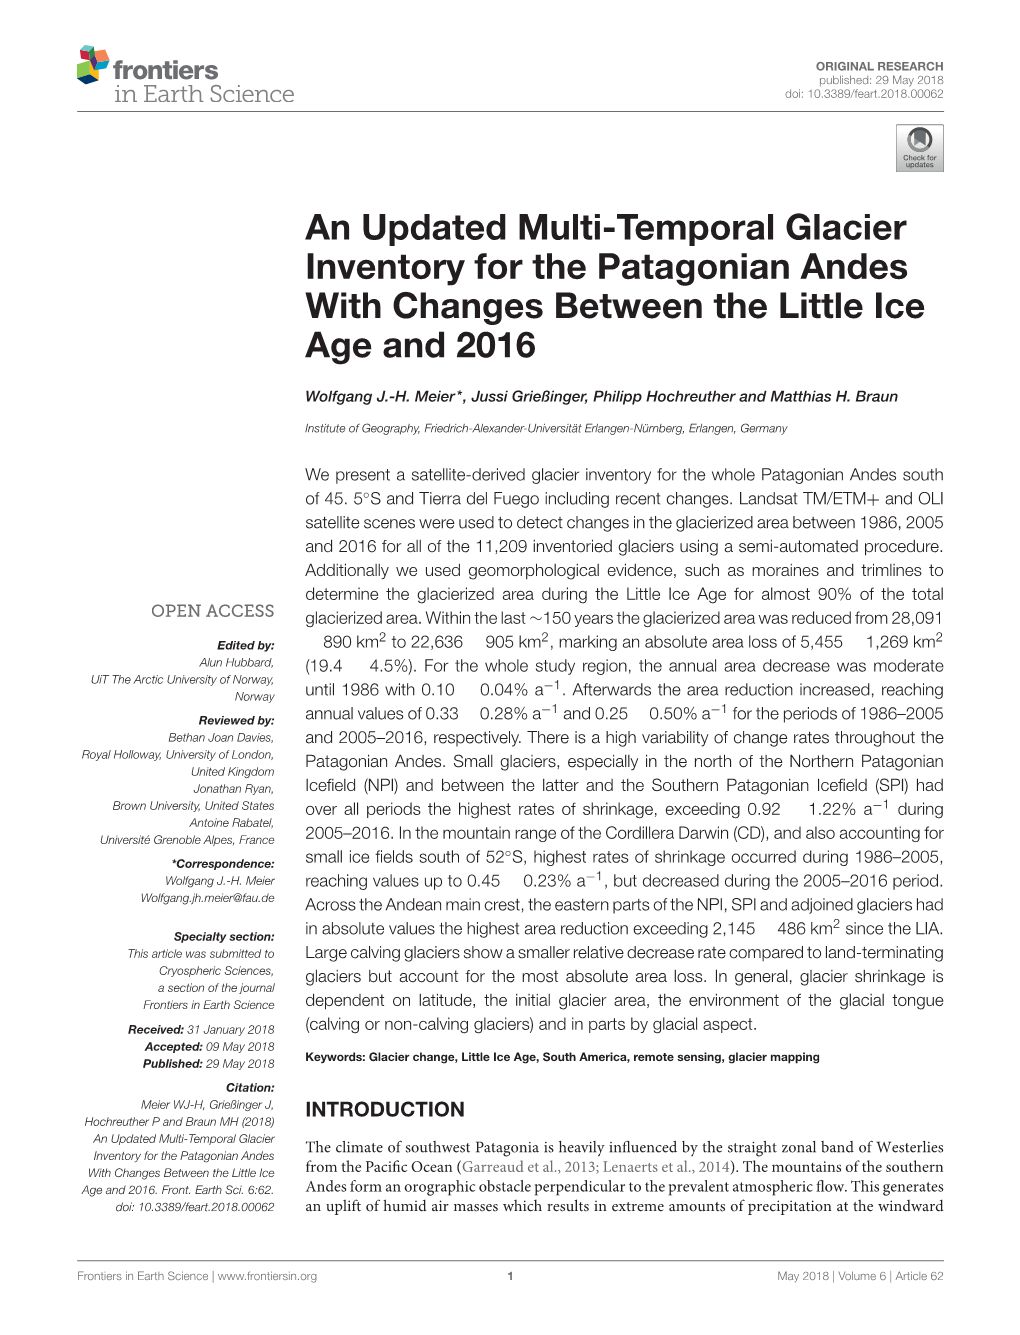 An Updated Multi-Temporal Glacier Inventory for the Patagonian Andes with Changes Between the Little Ice Age and 2016